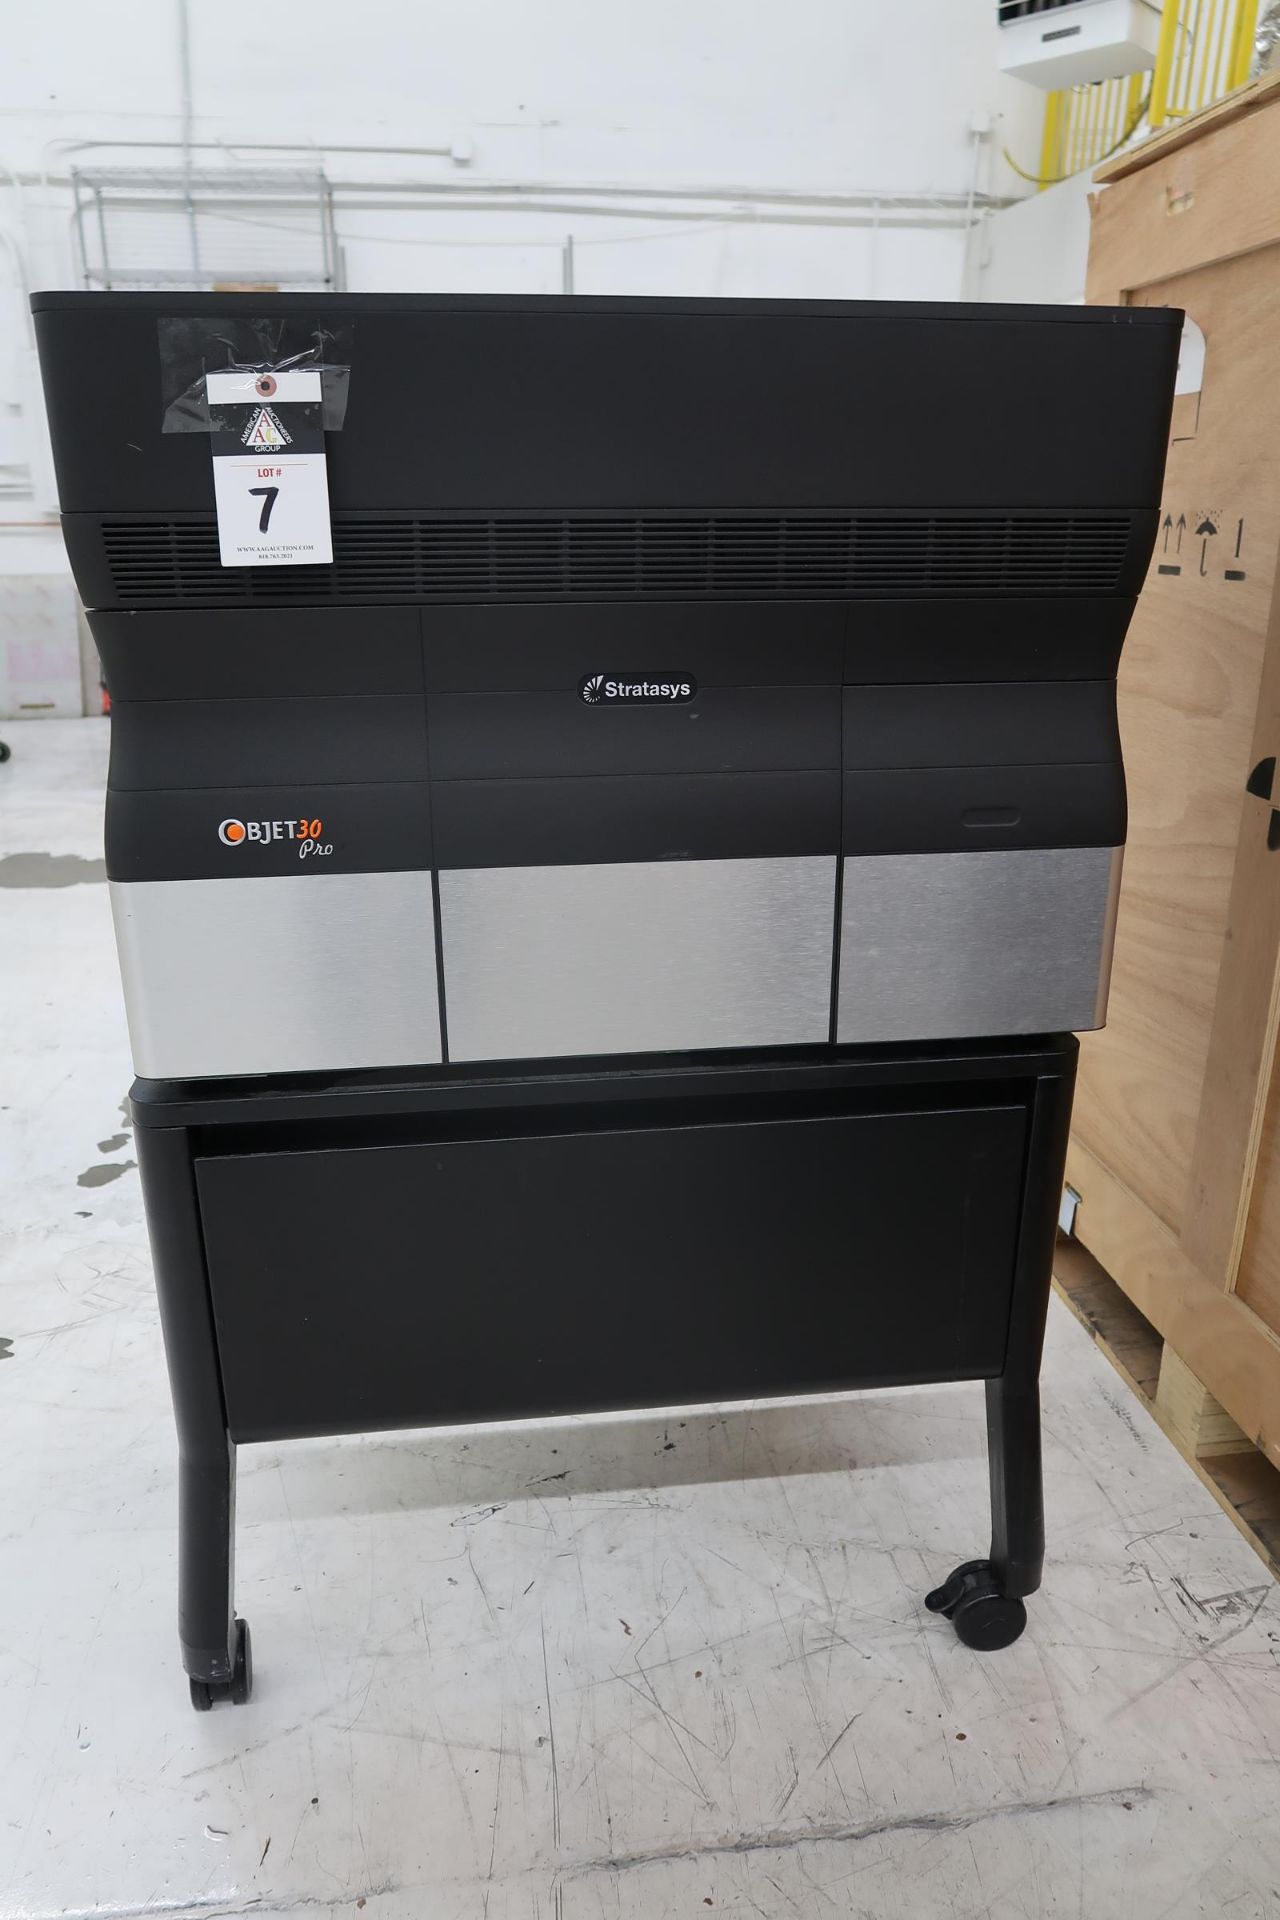 2013 Stratasys OBJET 30 Pro Industrial 3D Printer s/n 2240311 w/ Stratasys Controls, SOLD AS IS - Image 25 of 25